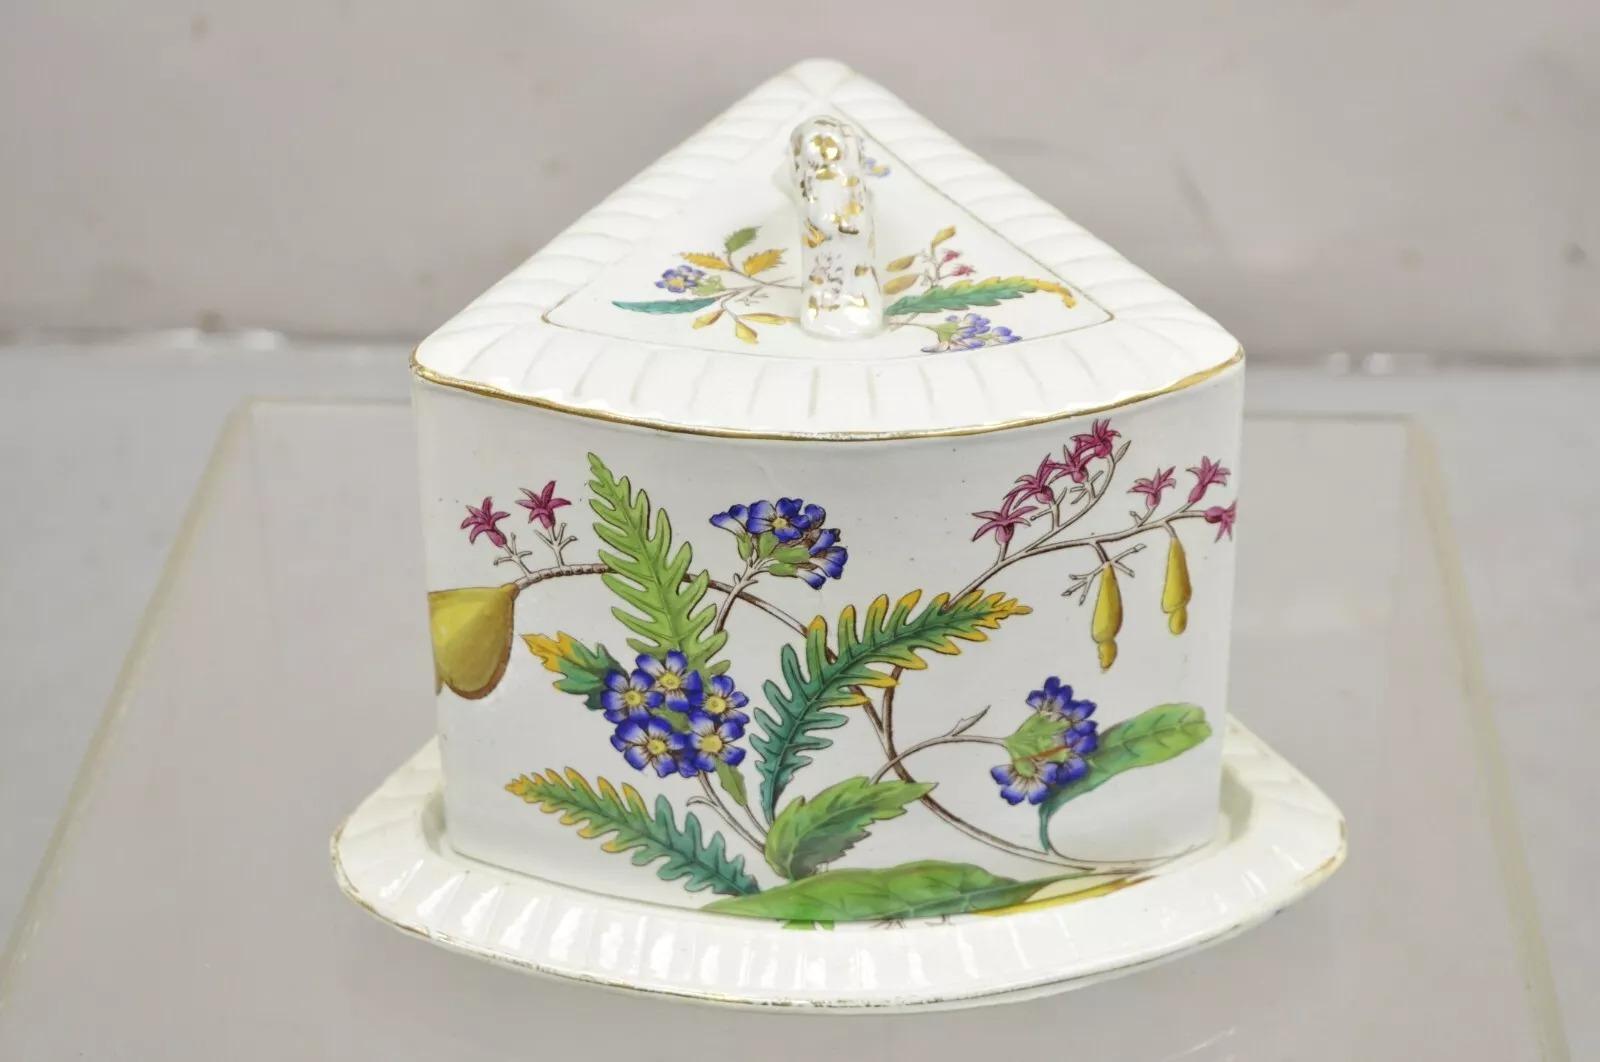 Antique Victorian Large Porcelain Covered Cheese Dish with Flowers and Leaves For Sale 6